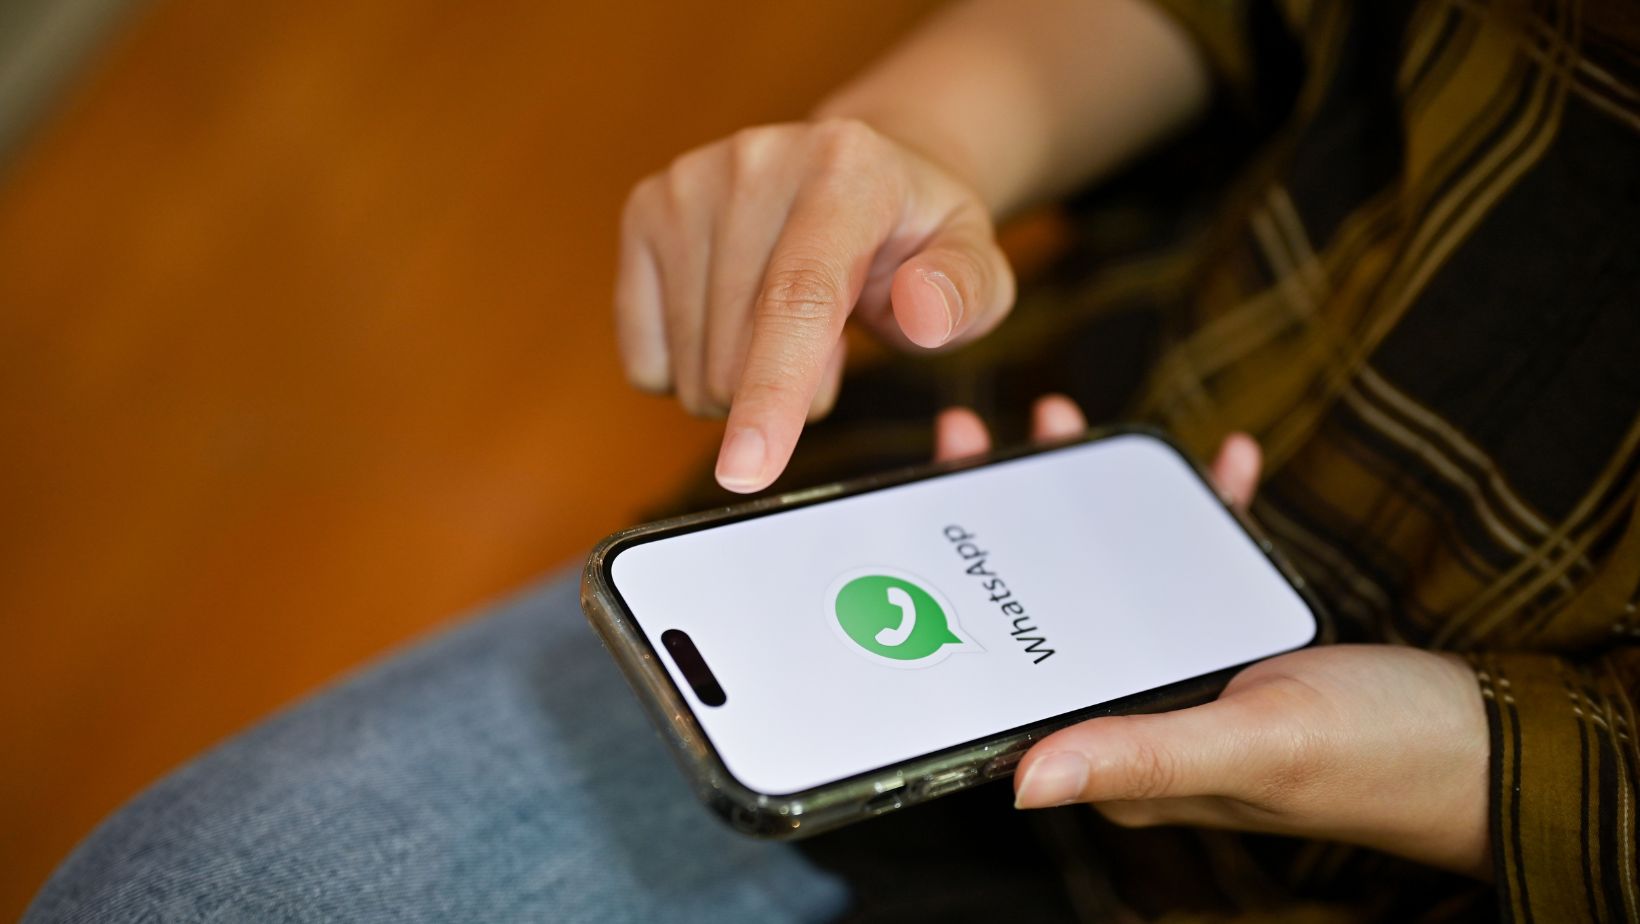 Dp Images for WhatsApp: The Perfect Visuals to Elevate Your Chats